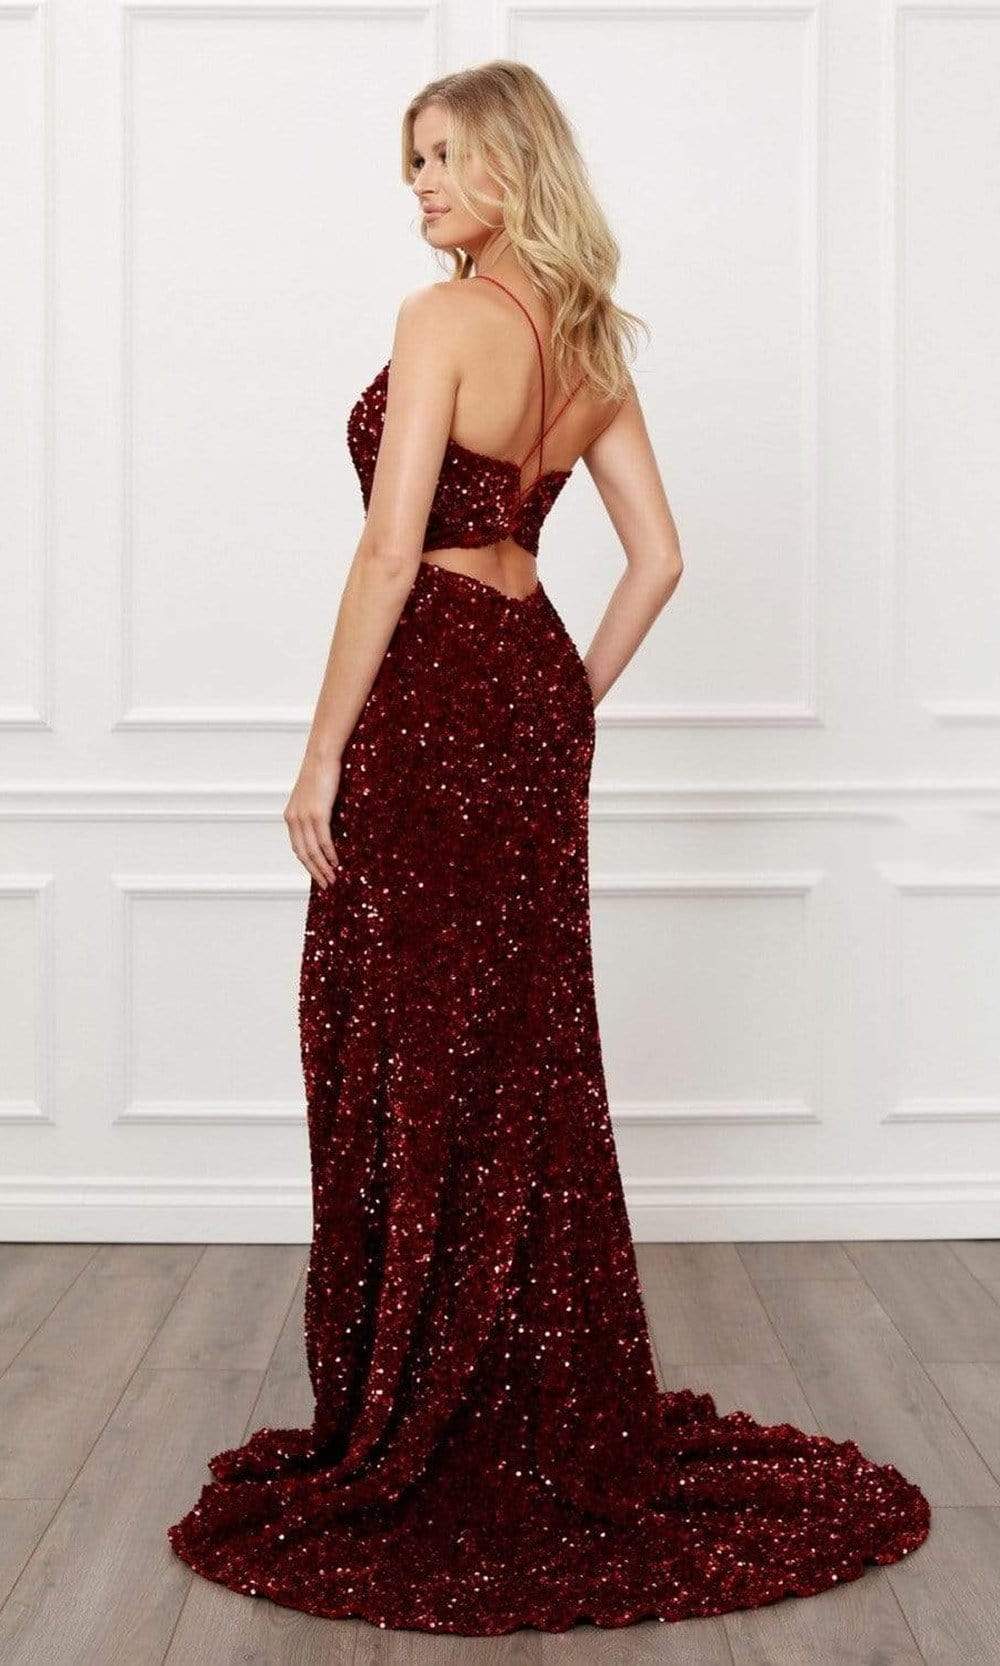 Nox Anabel - R433 Sequined Cut Out Back Long Dress Evening Dresses